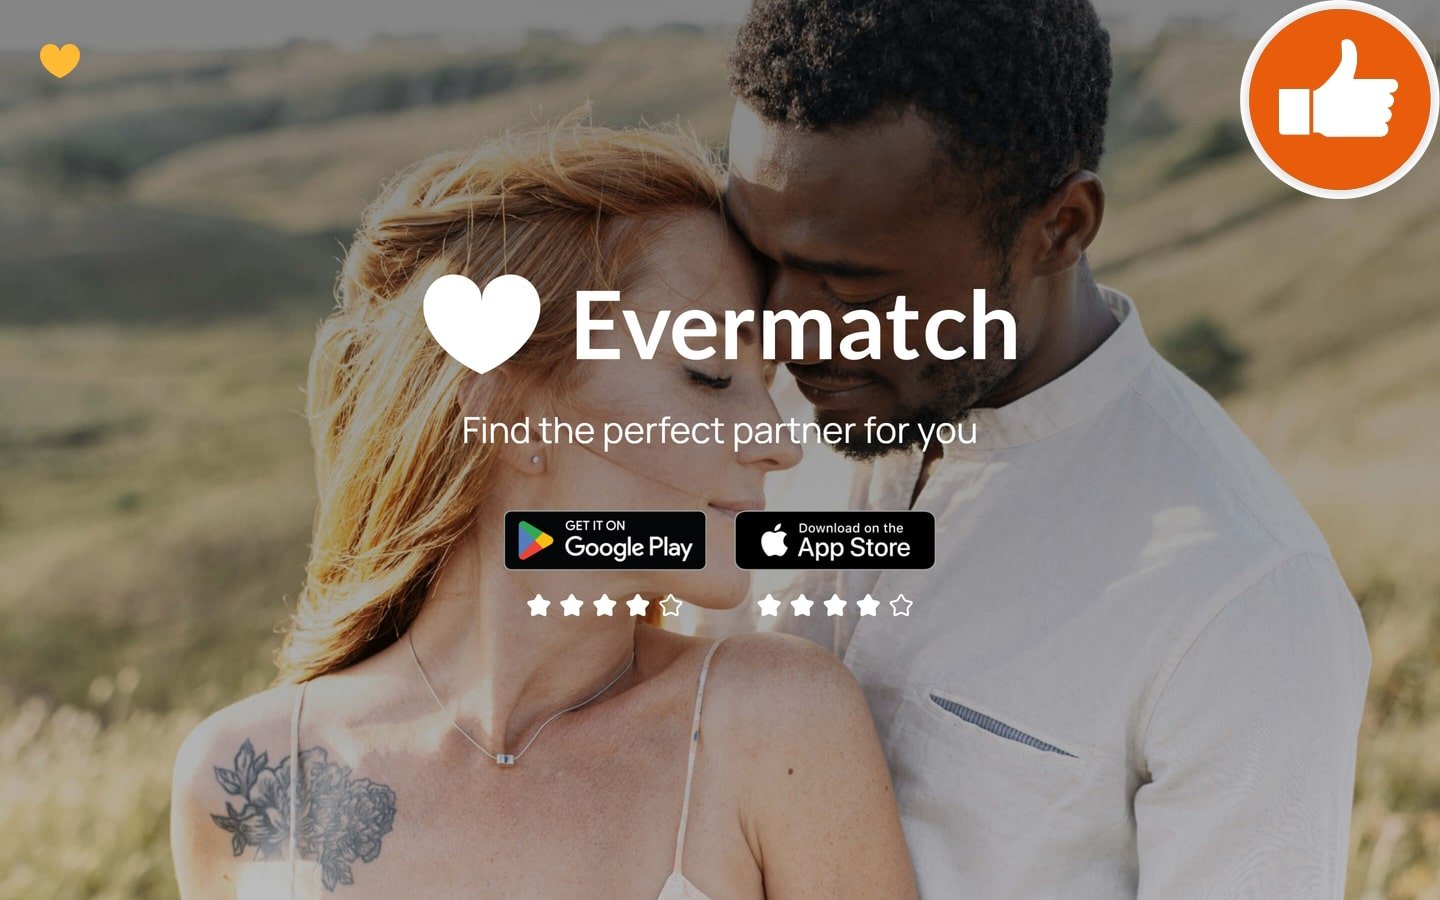 Review Evermatch.me scam experience